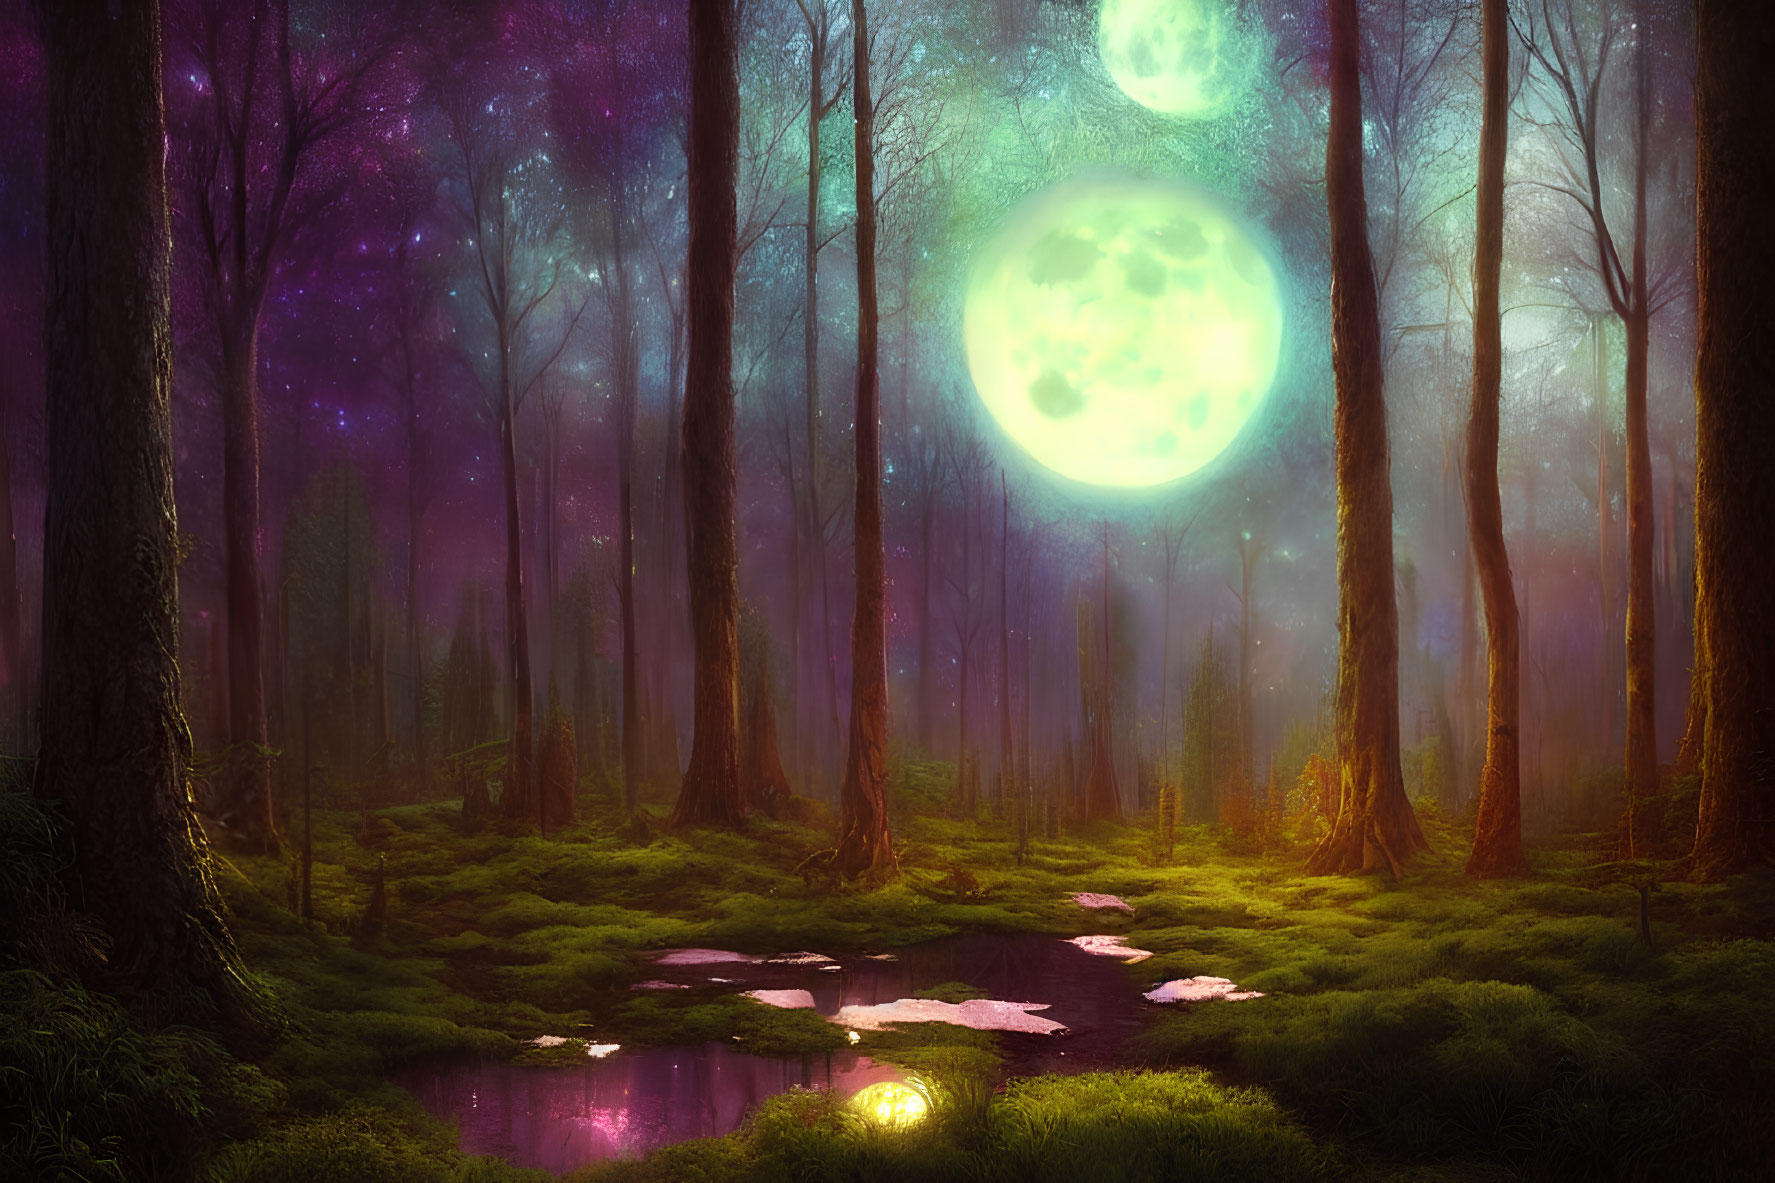 Enchanting night forest with glowing moon, stars, and purple haze